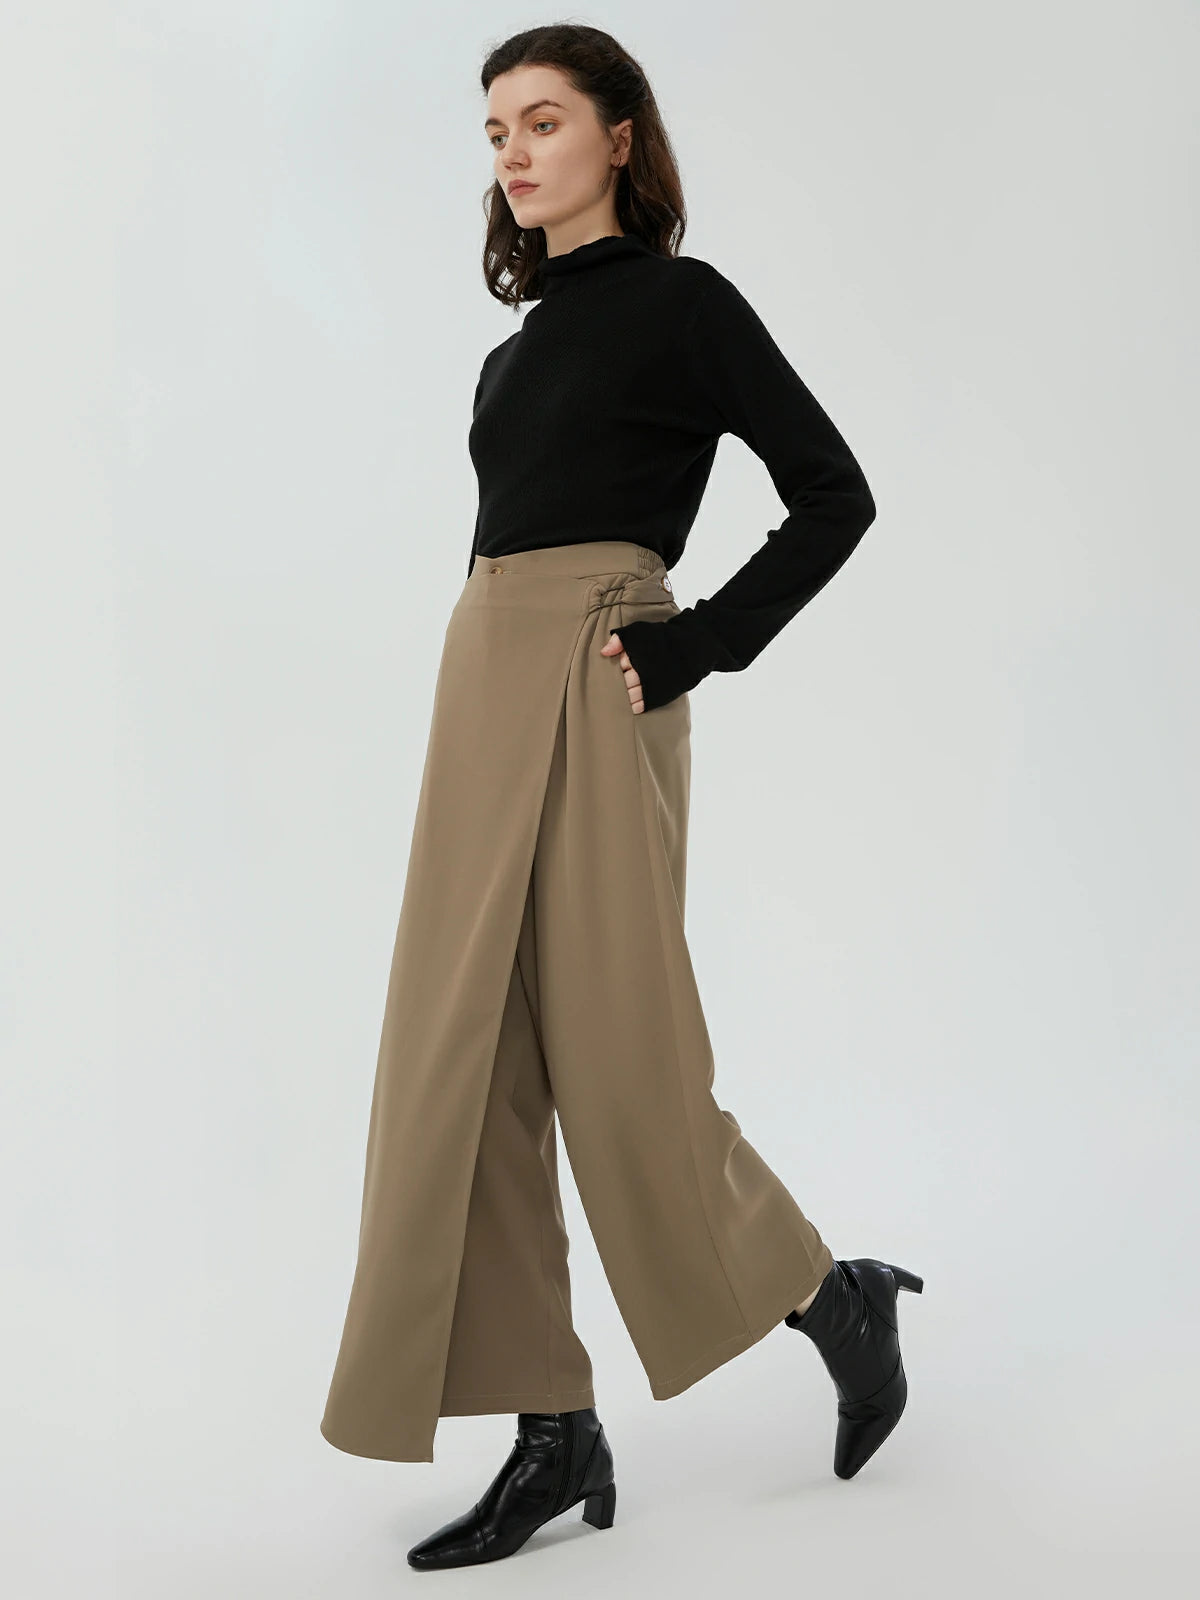 Versatile outfit guide for wide-leg pants with pocket detailing